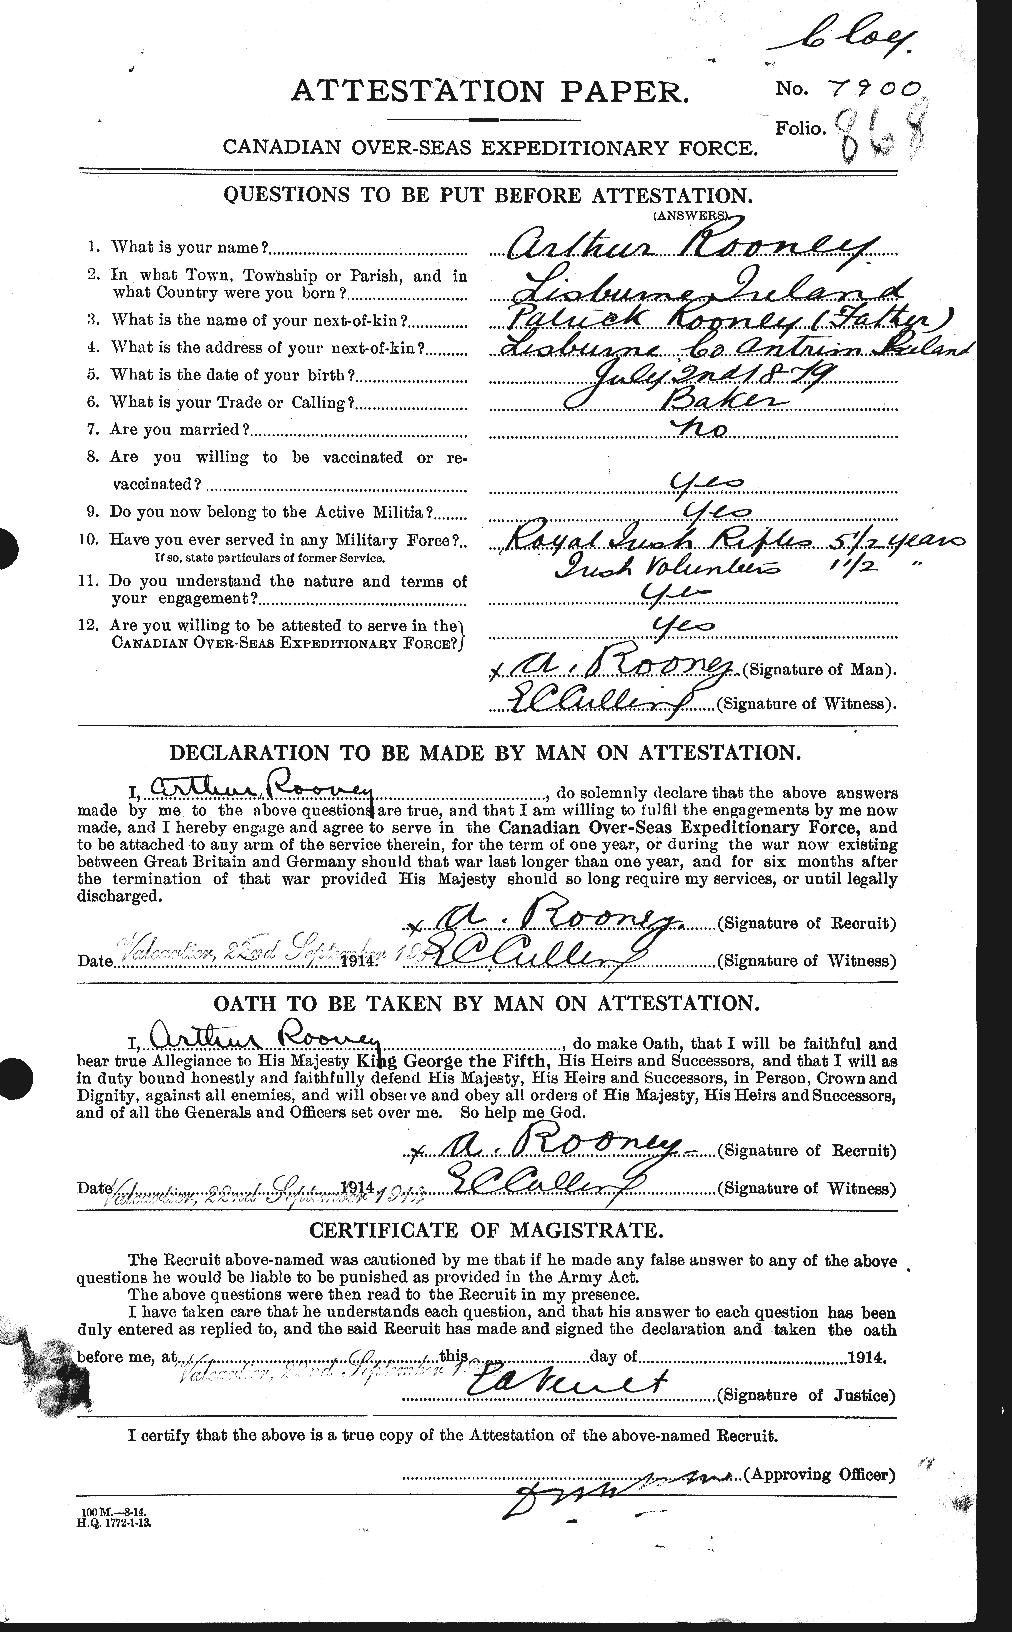 Personnel Records of the First World War - CEF 615369a